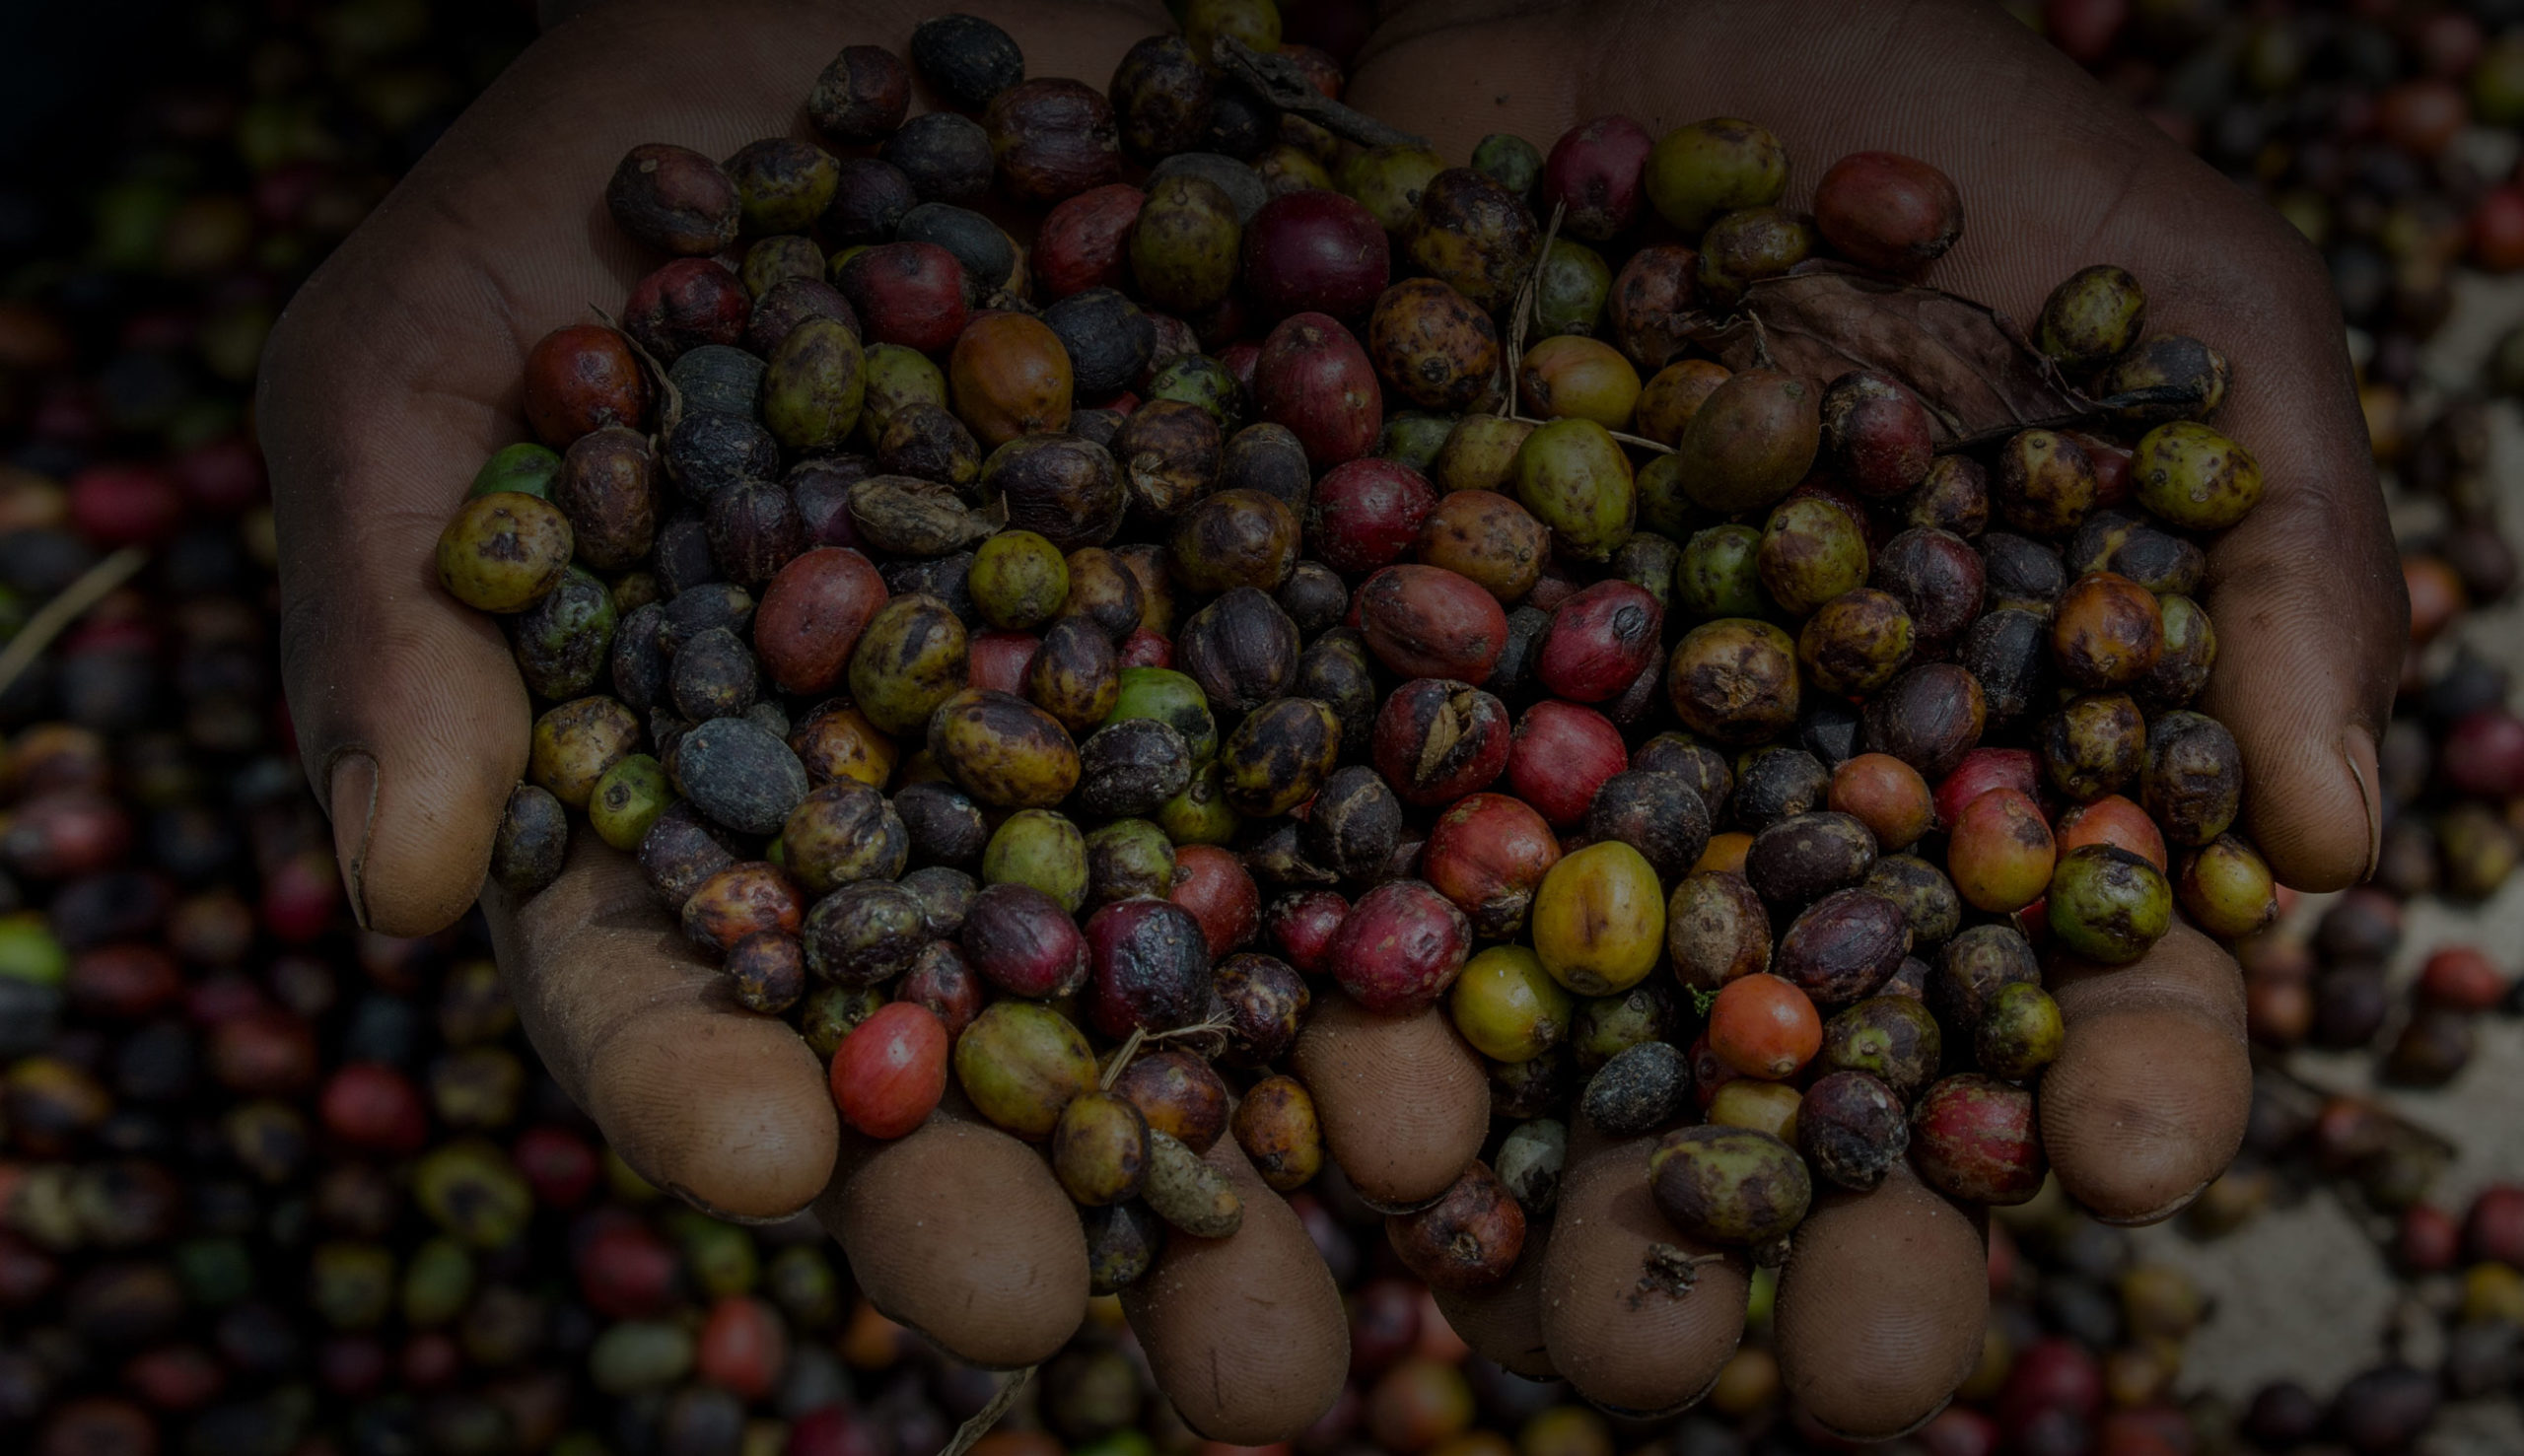 Grains of ripe coffee in the hands of a worker at an East African coffee plantation, vibrant coffee bean colours